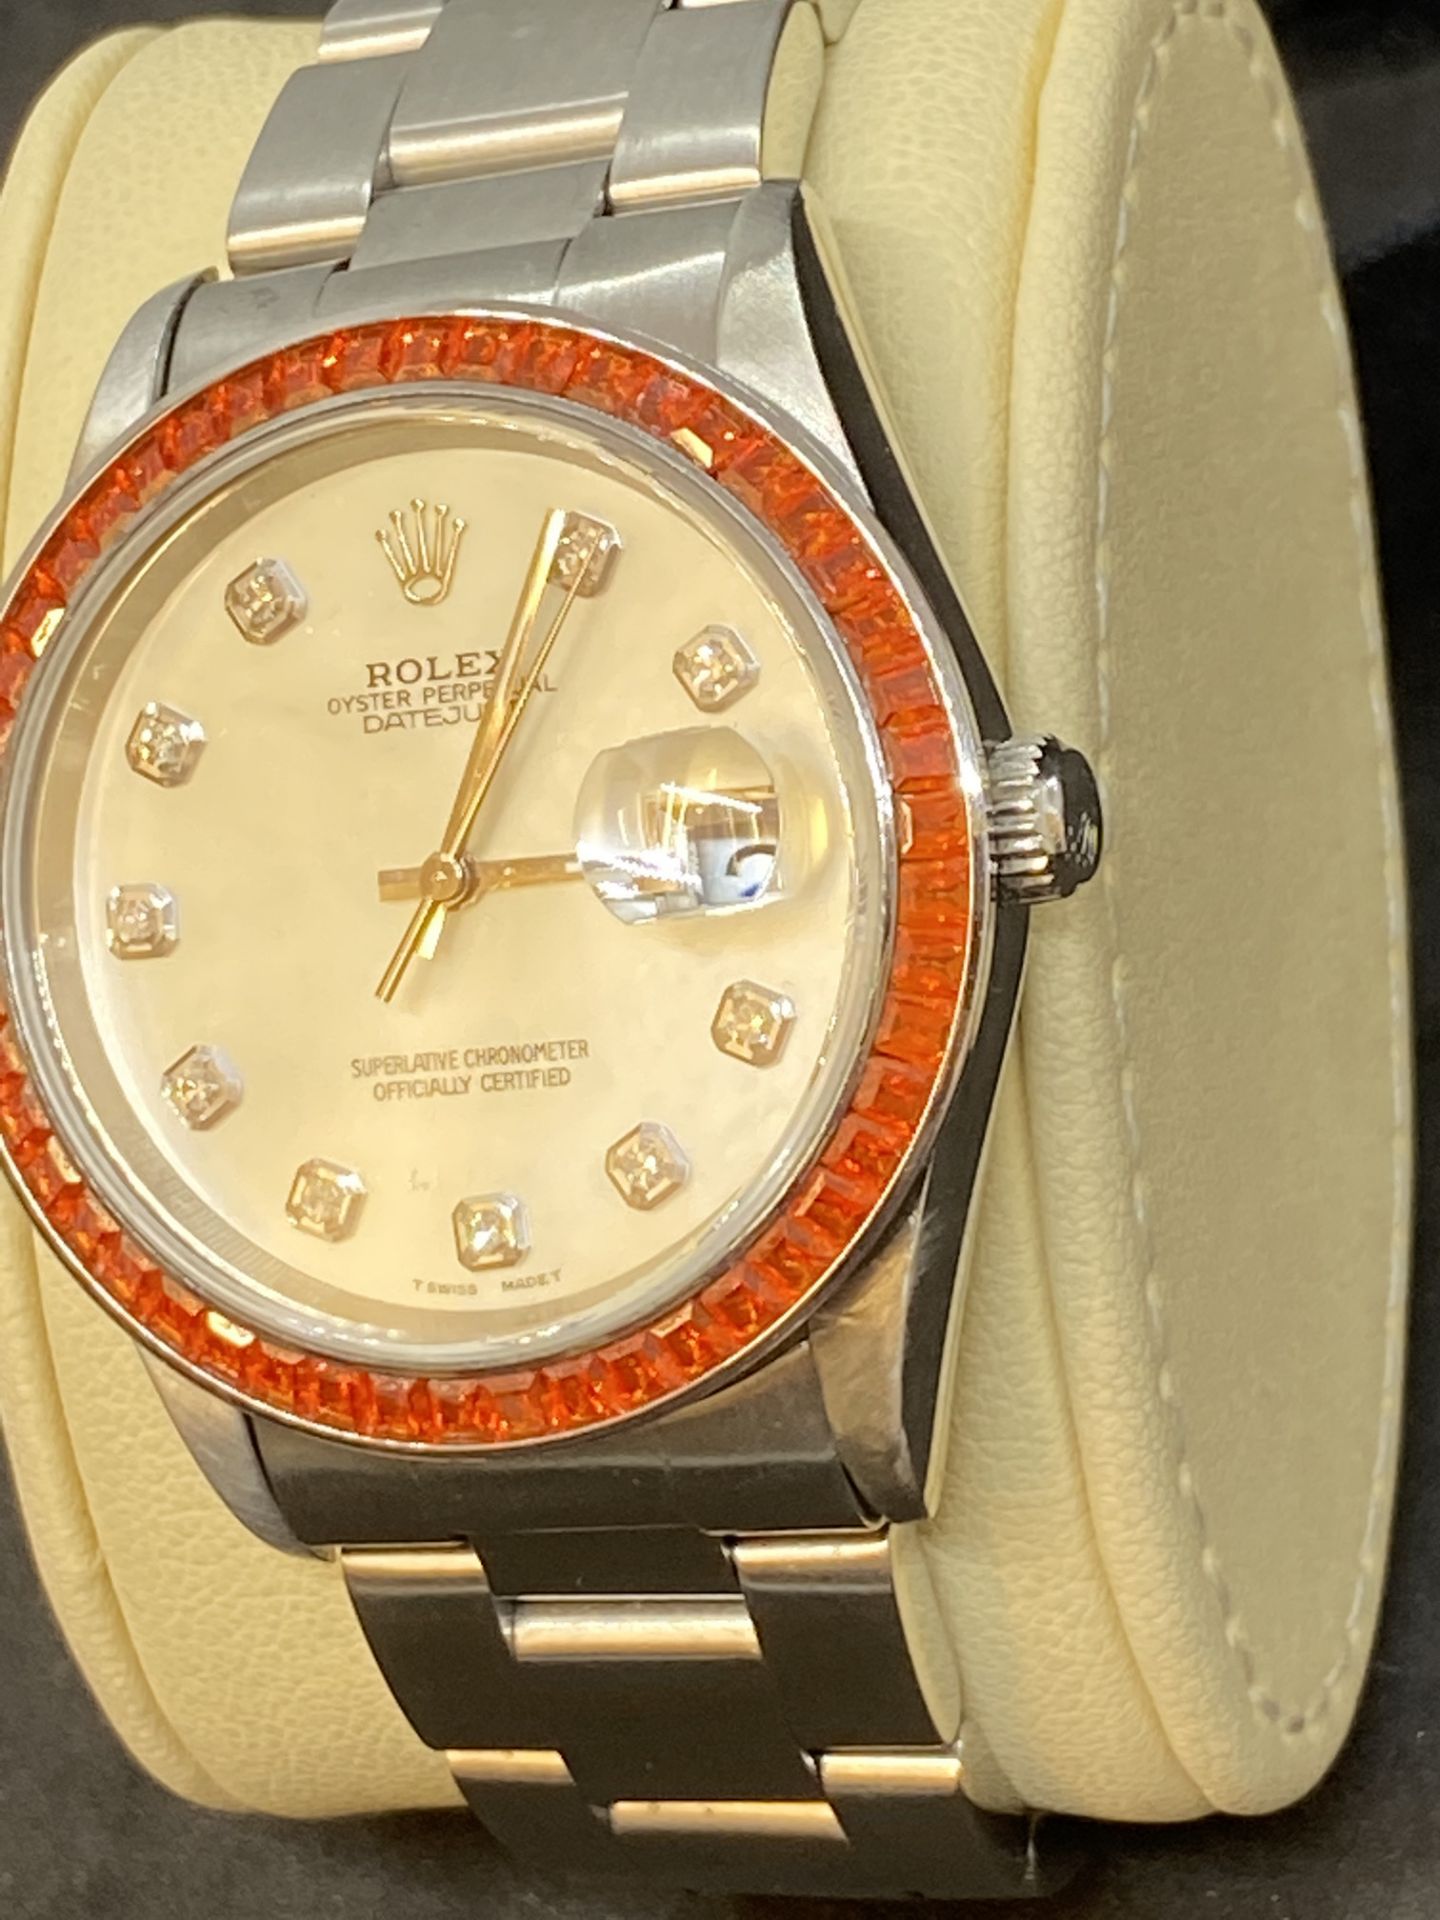 STAINLESS STEEL AUTOMATIC ROLEX WITH DIAMOND DOT DIAL & ORANGE BEZEL - Image 3 of 10